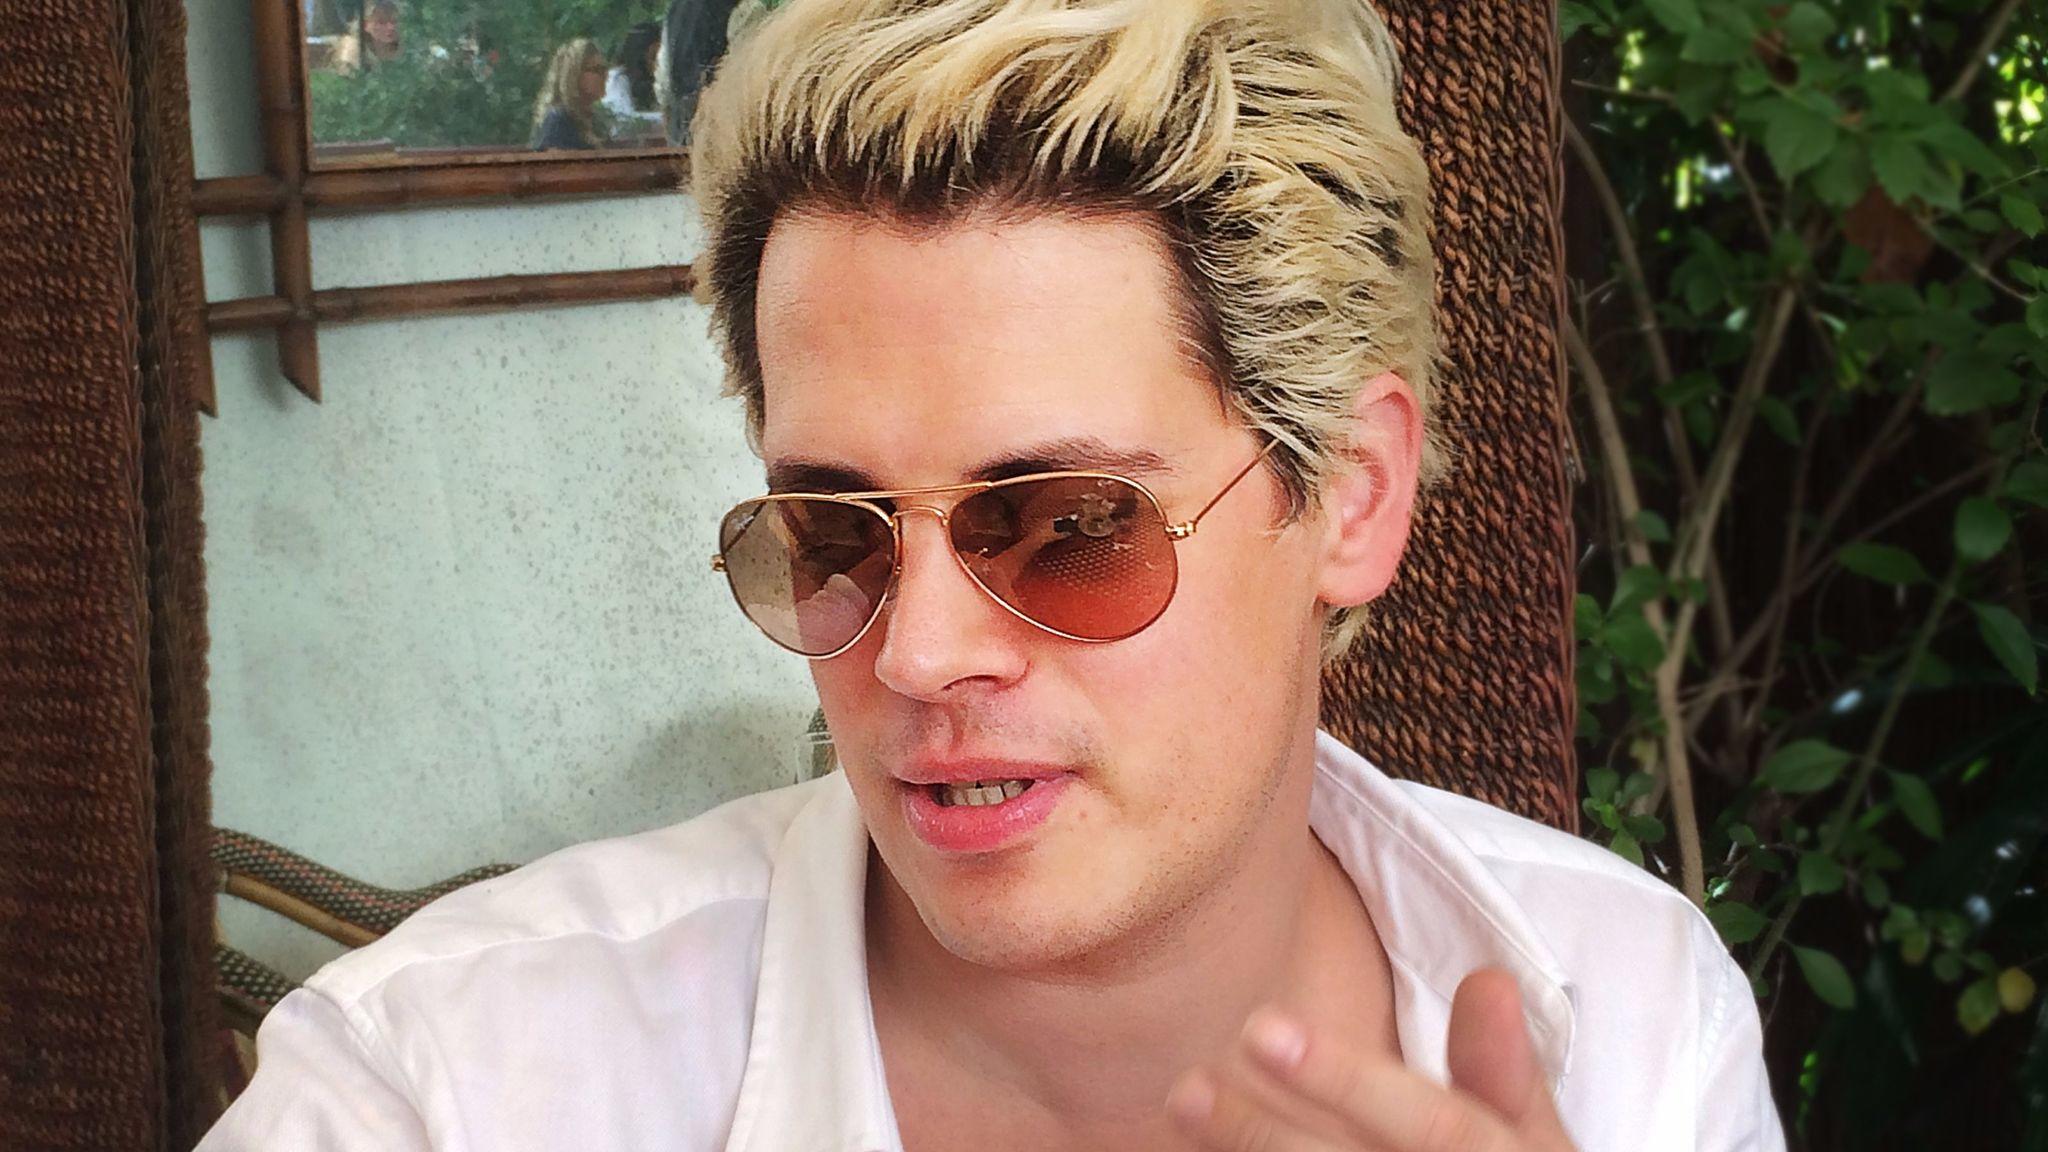 Milo Yiannopoulos announced he plans to make an appearance at UC Berkeley as part of a "Free Speech Week" event on campus.